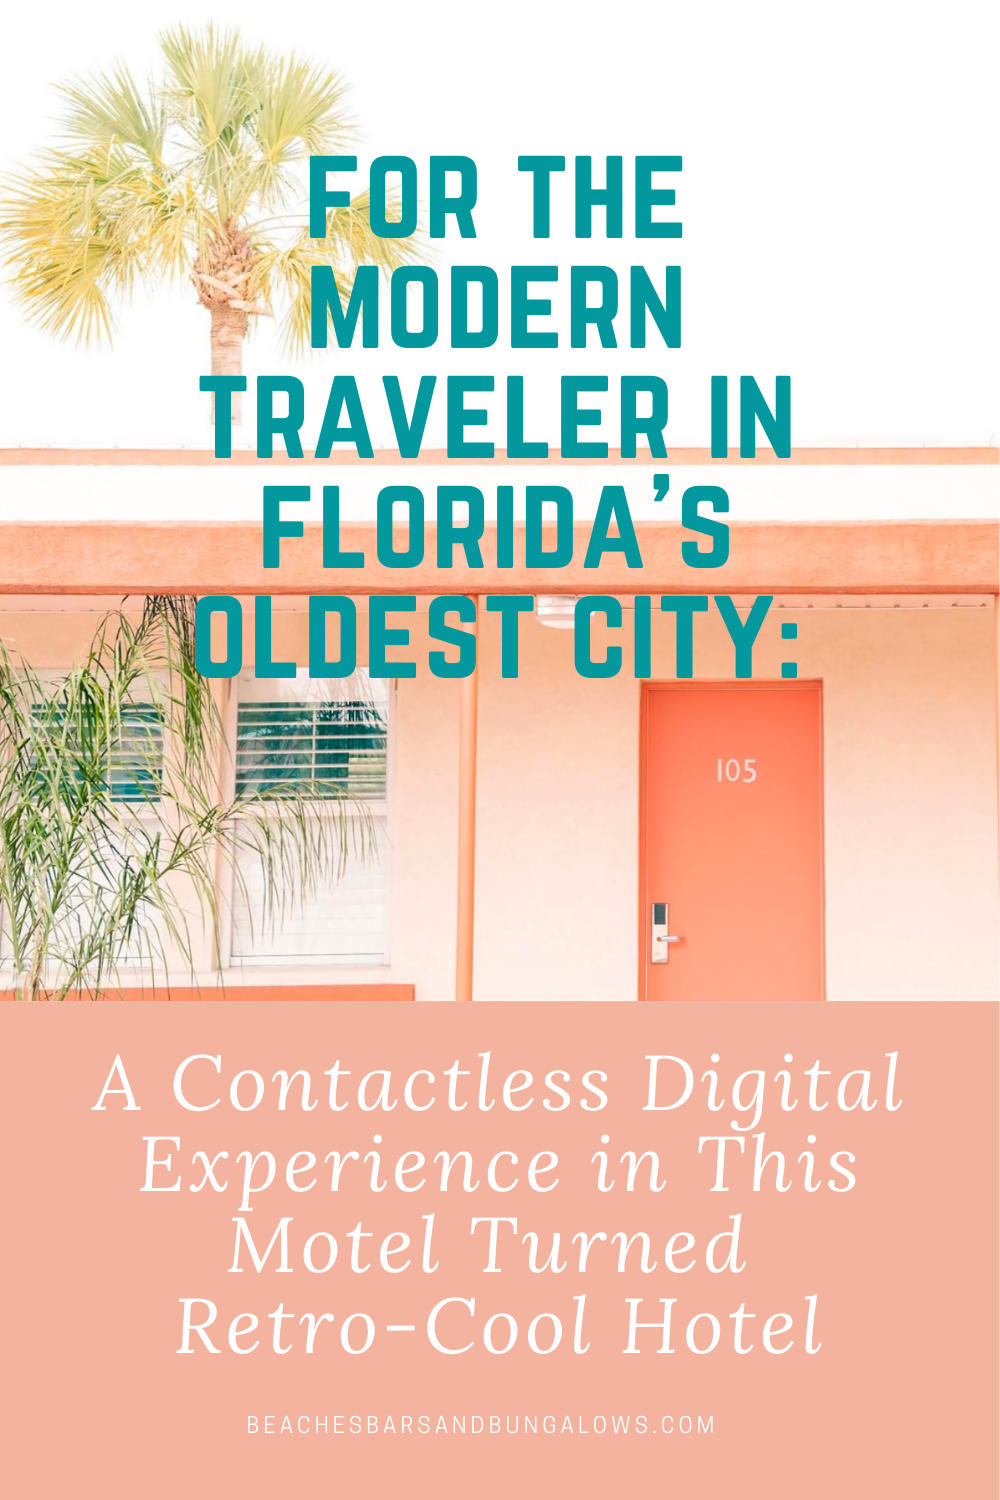 For the Modern Traveler in Florida's Oldest City: A Contactless Digital Experience in This Motel Turned Retro-Cool Hotel pin for Pinterest